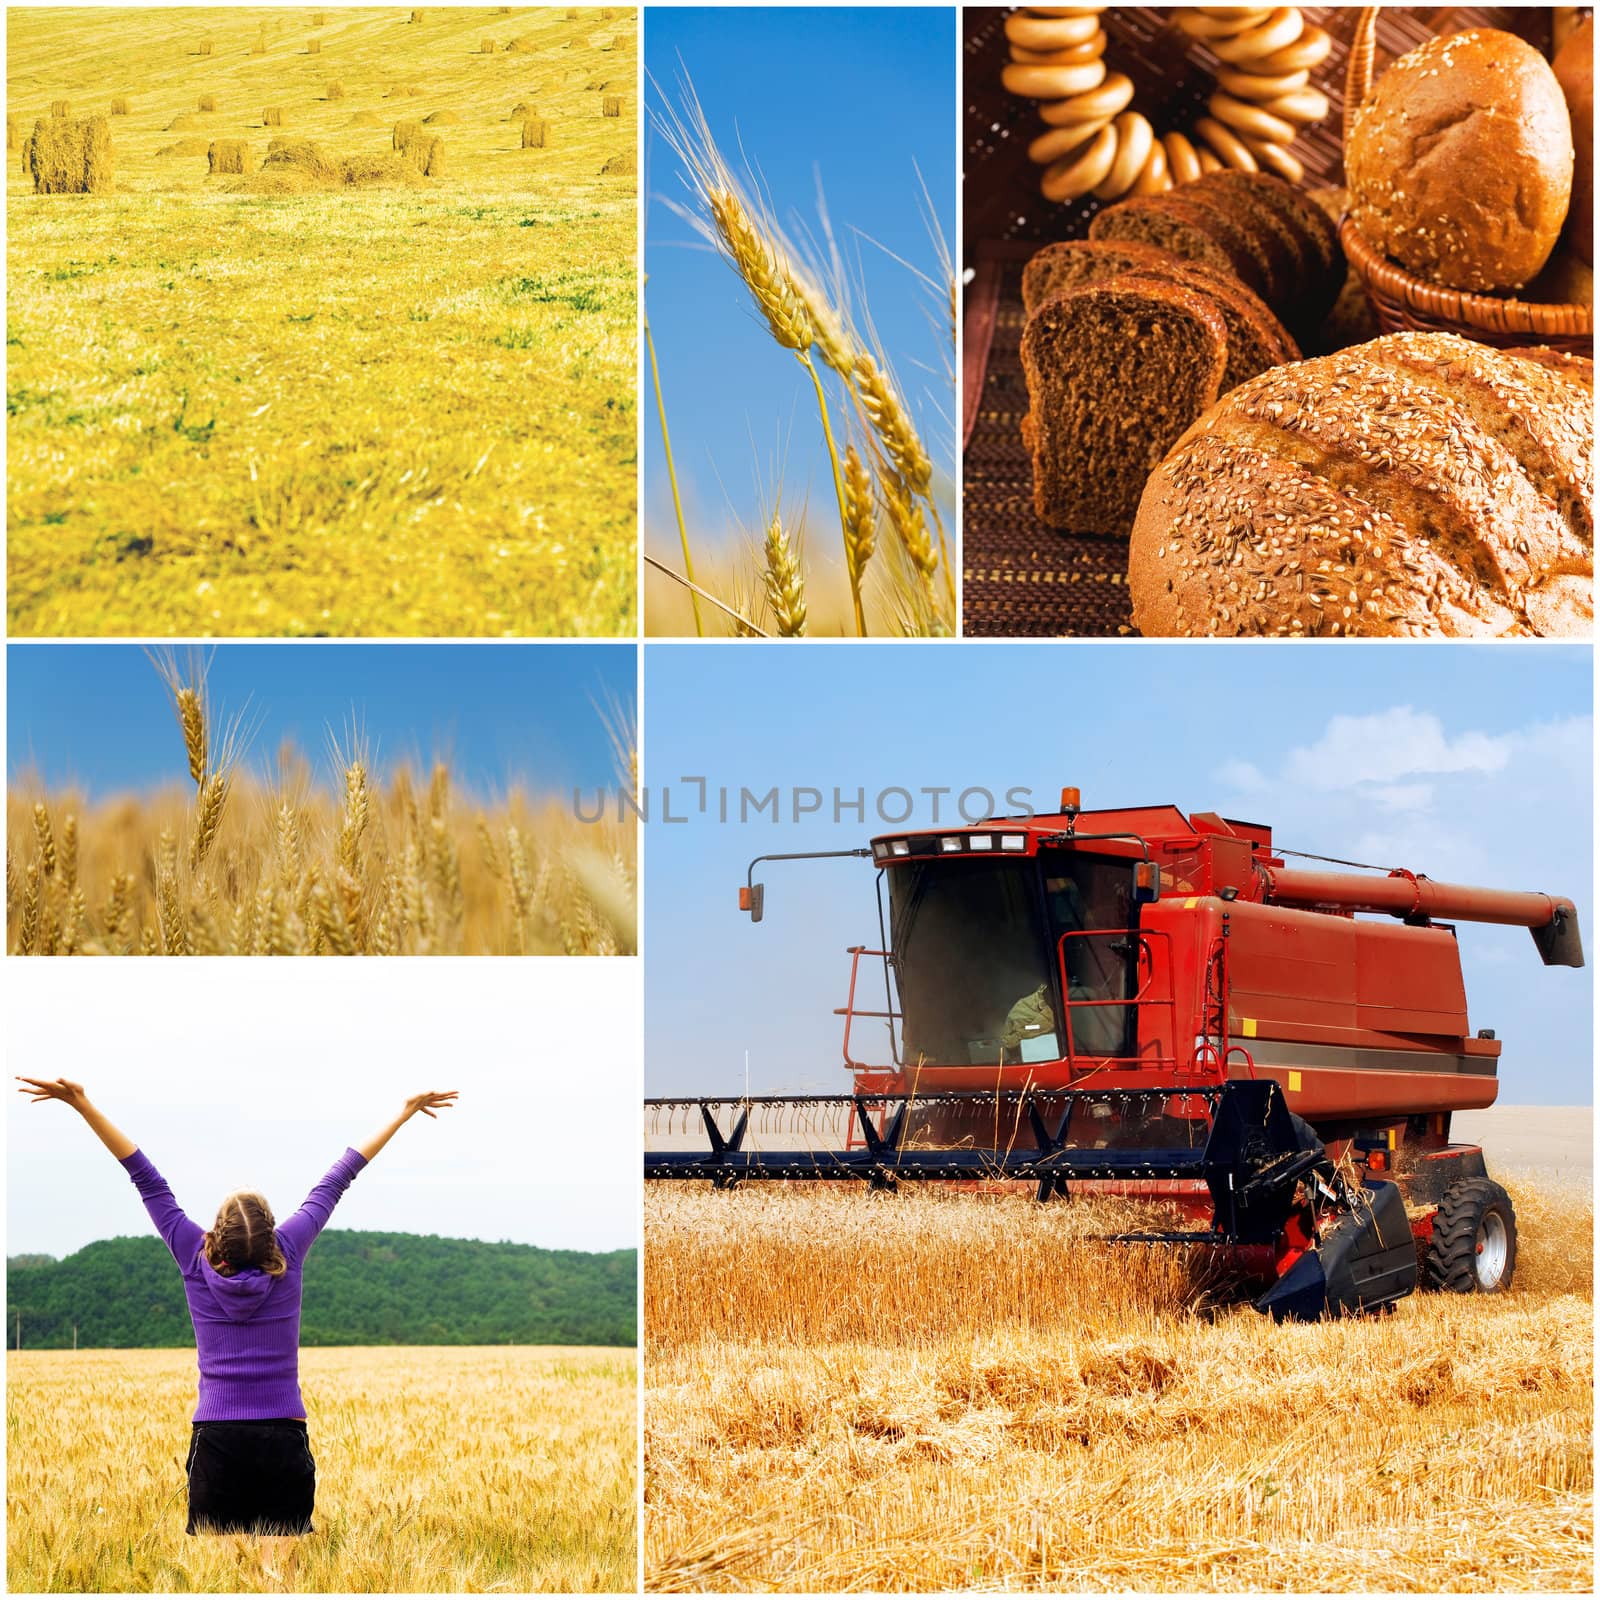 different images on the subject of summer and crop and harvesting